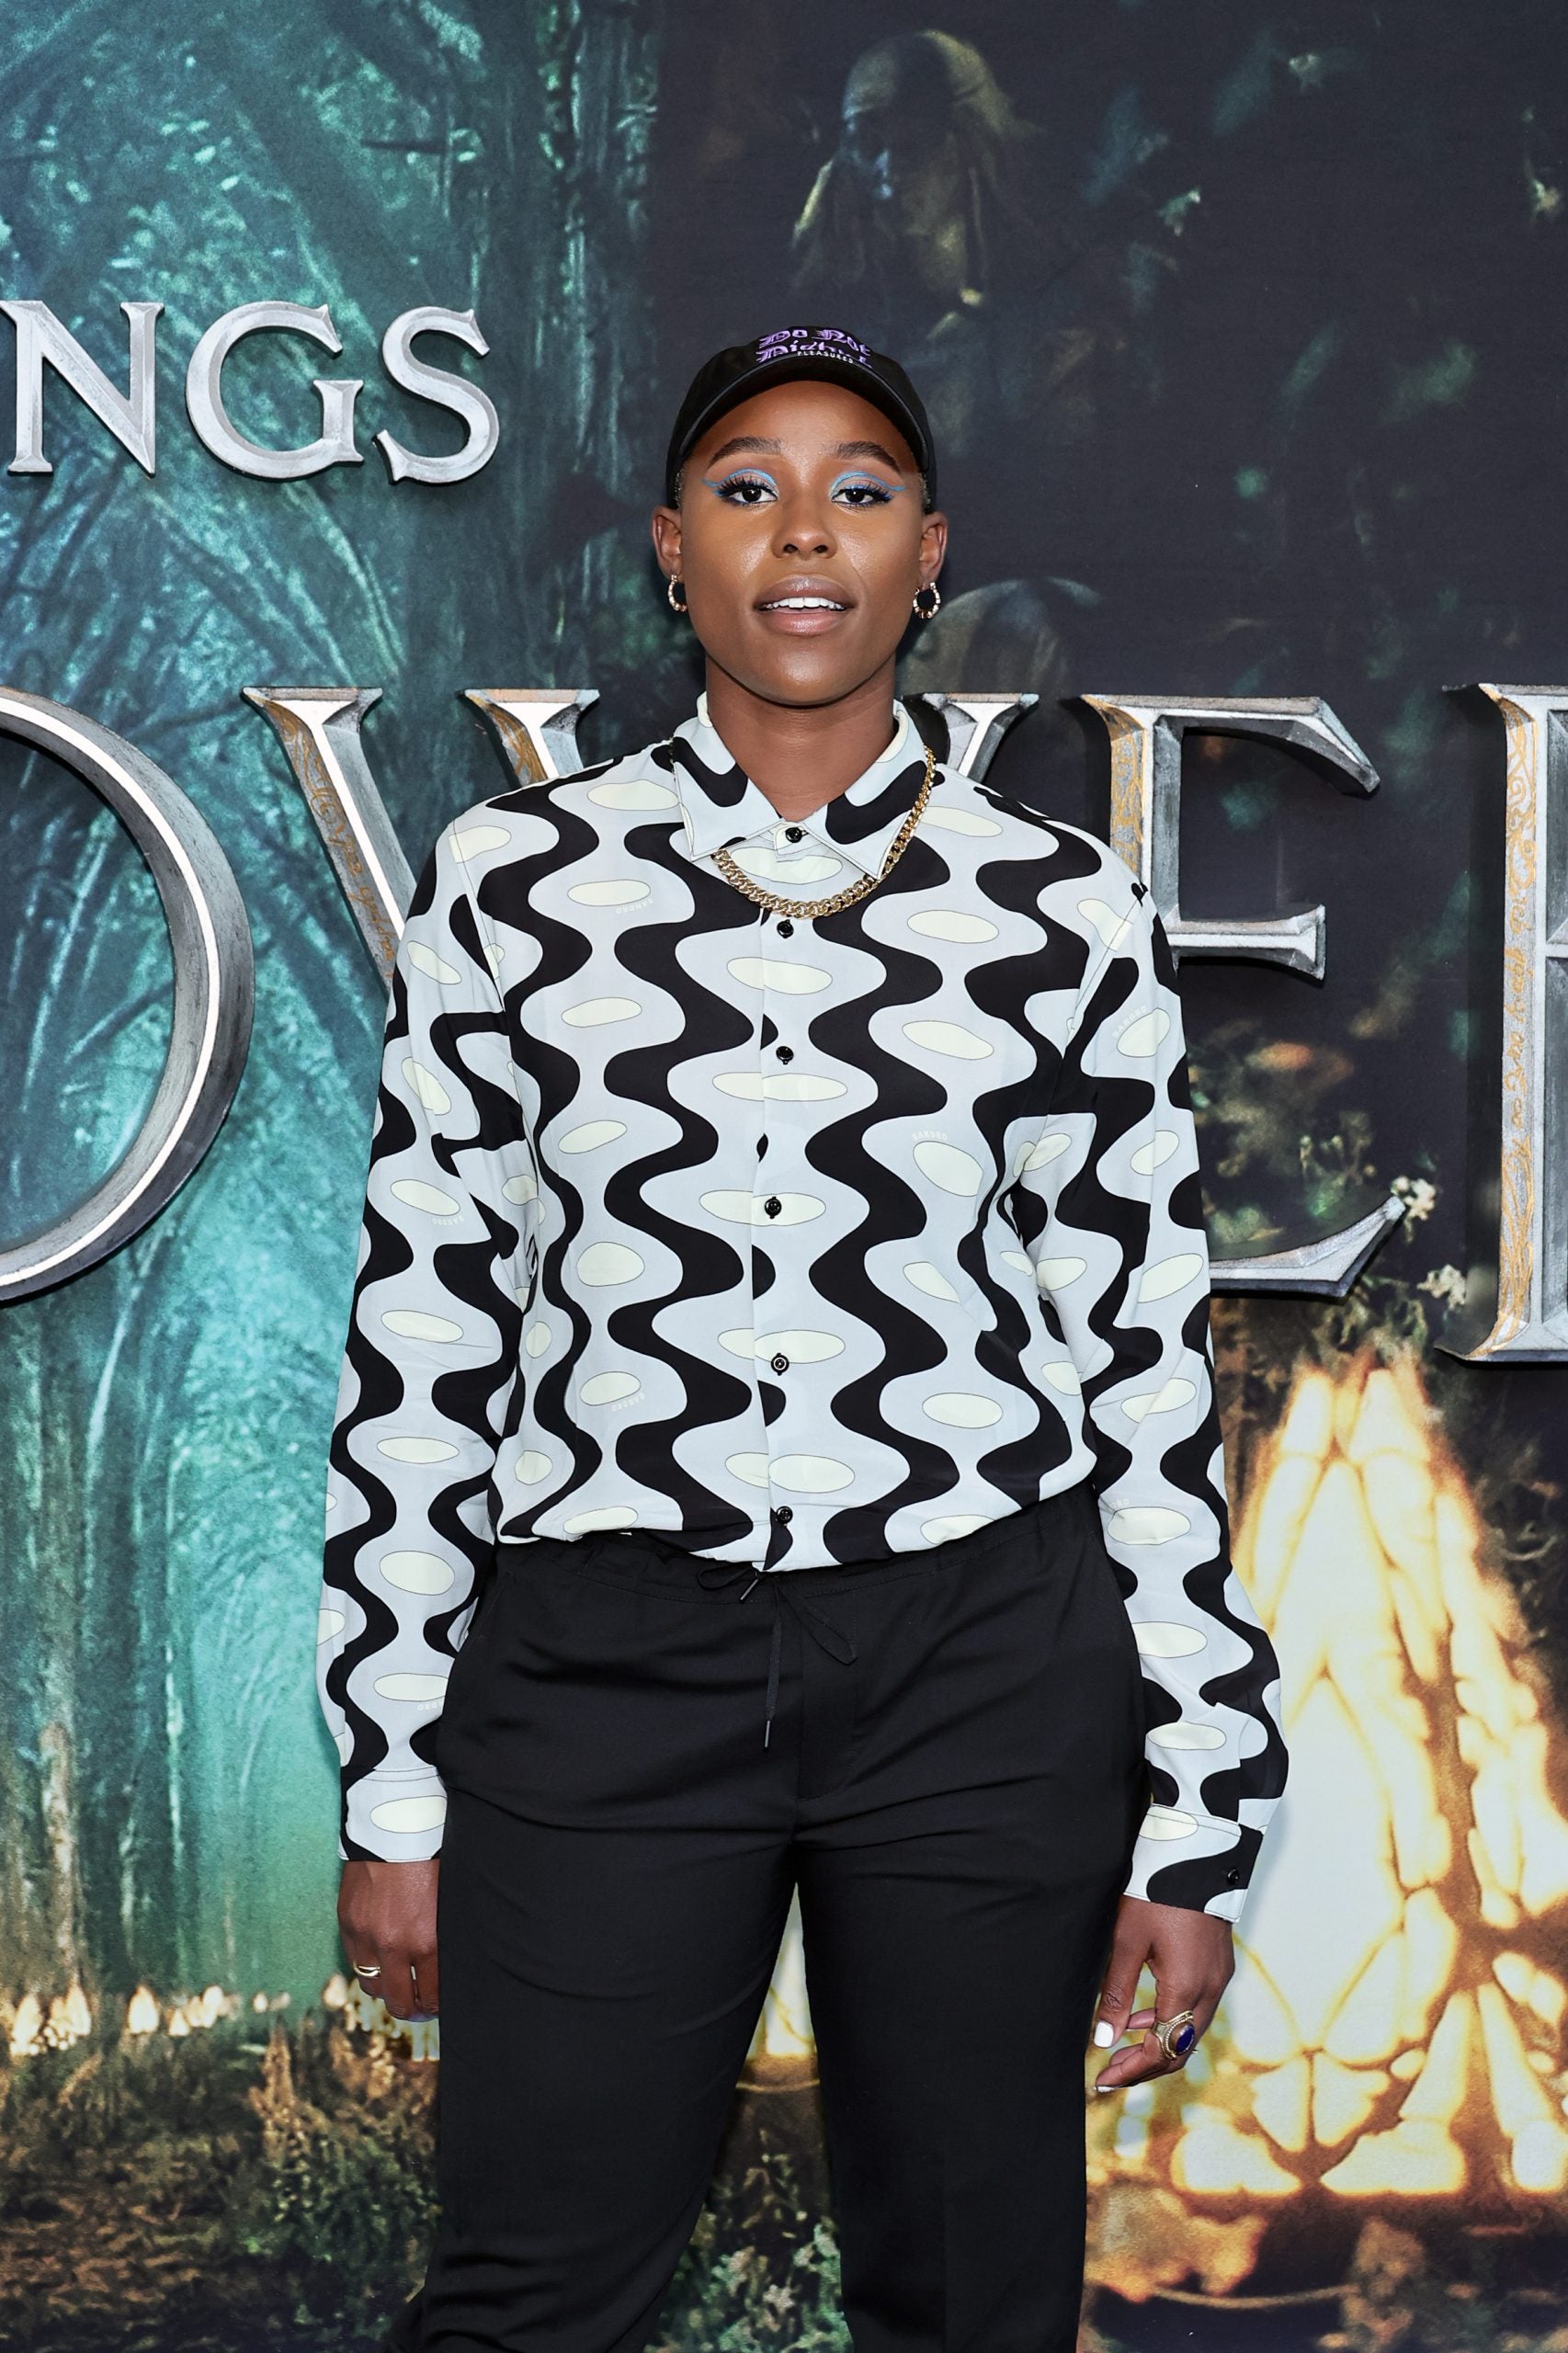 Star Gazing: Celebs Journey To Middle-Earth For Premieres Of 'LOTR: The Rings Of Power'